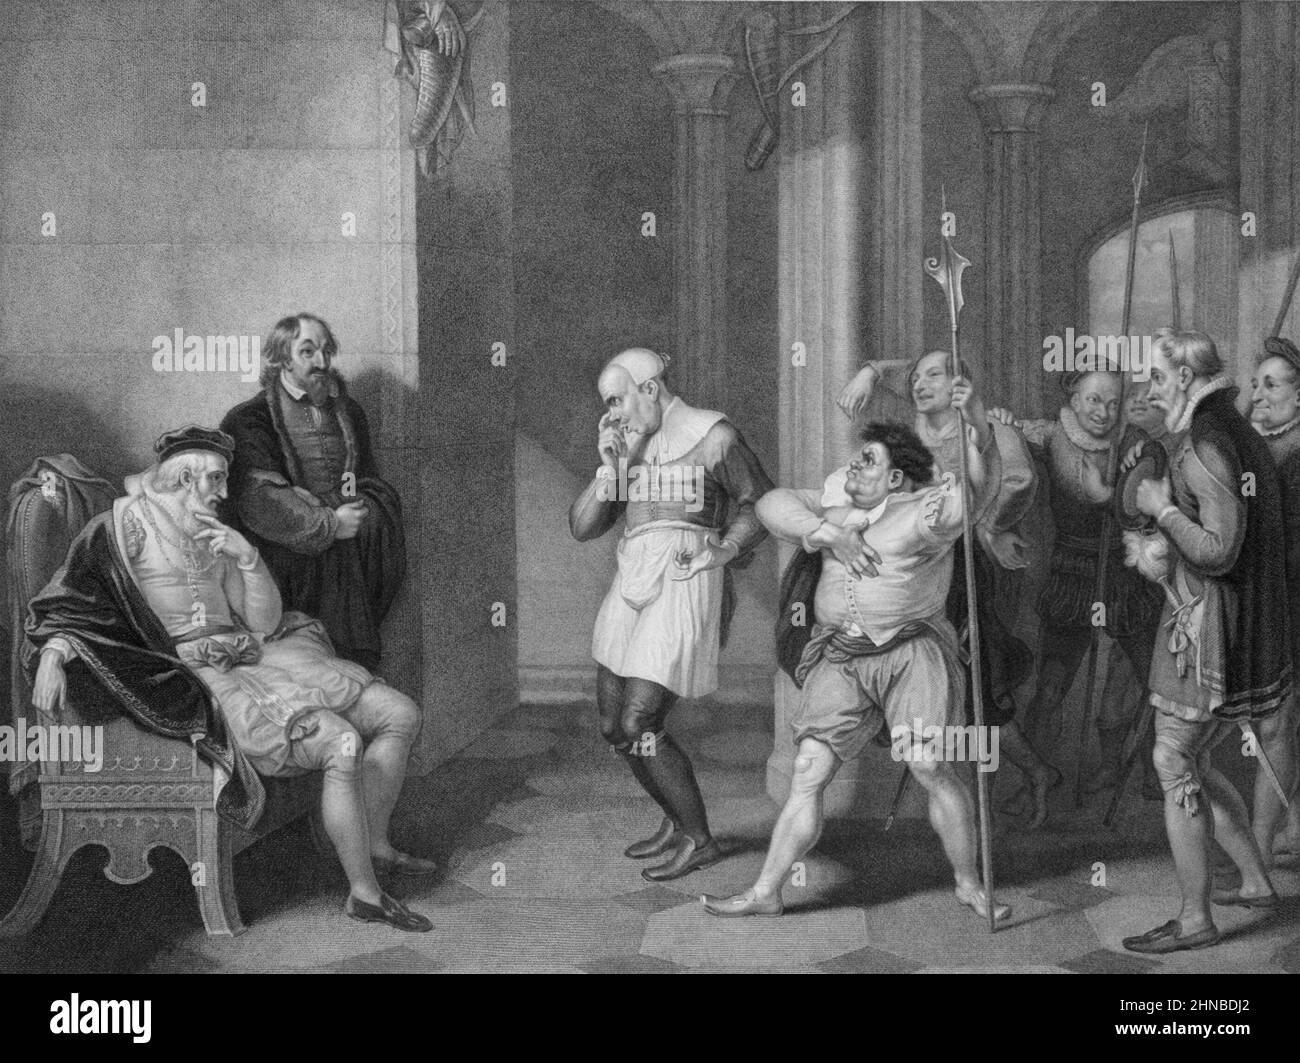 Escalus, a Justice, Elbow, Froth, Clown, Officers, etc. at Angelo's house, from Shakespeare, Measure for Measure, Act 2, Scene 1 Stock Photo